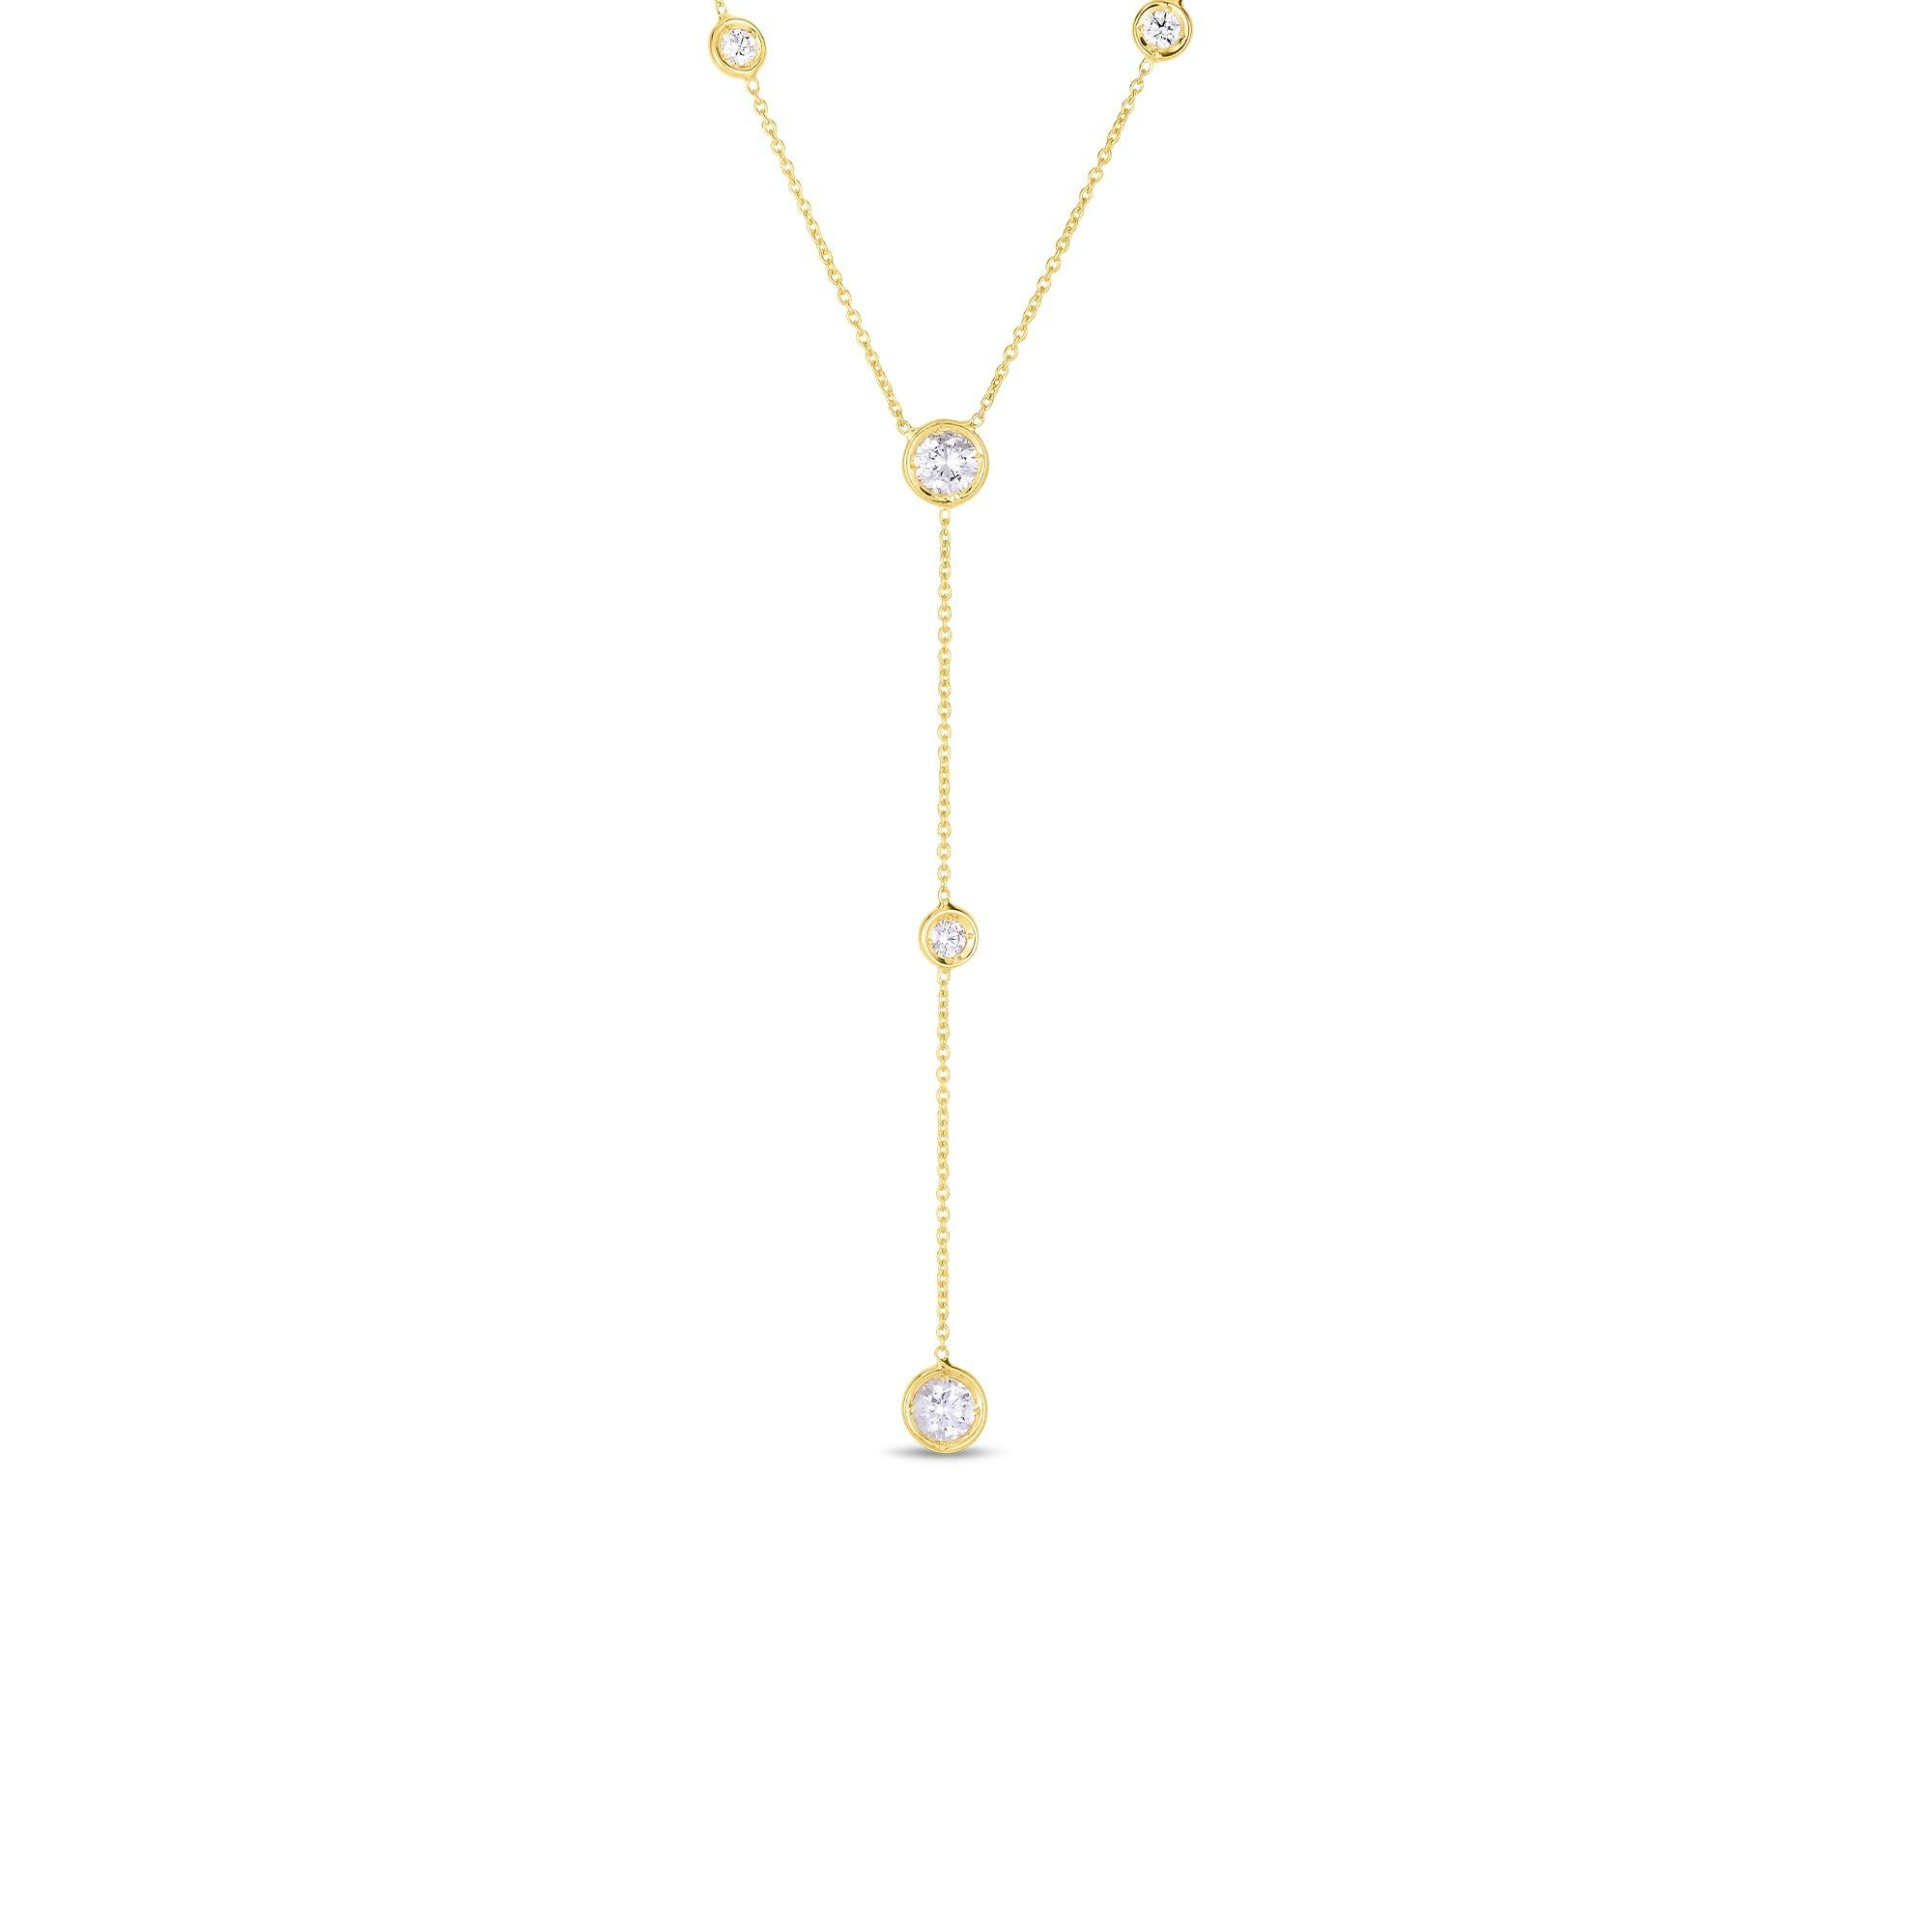  Roberto Coin Diamonds by the Inch 5-Station Y Necklace